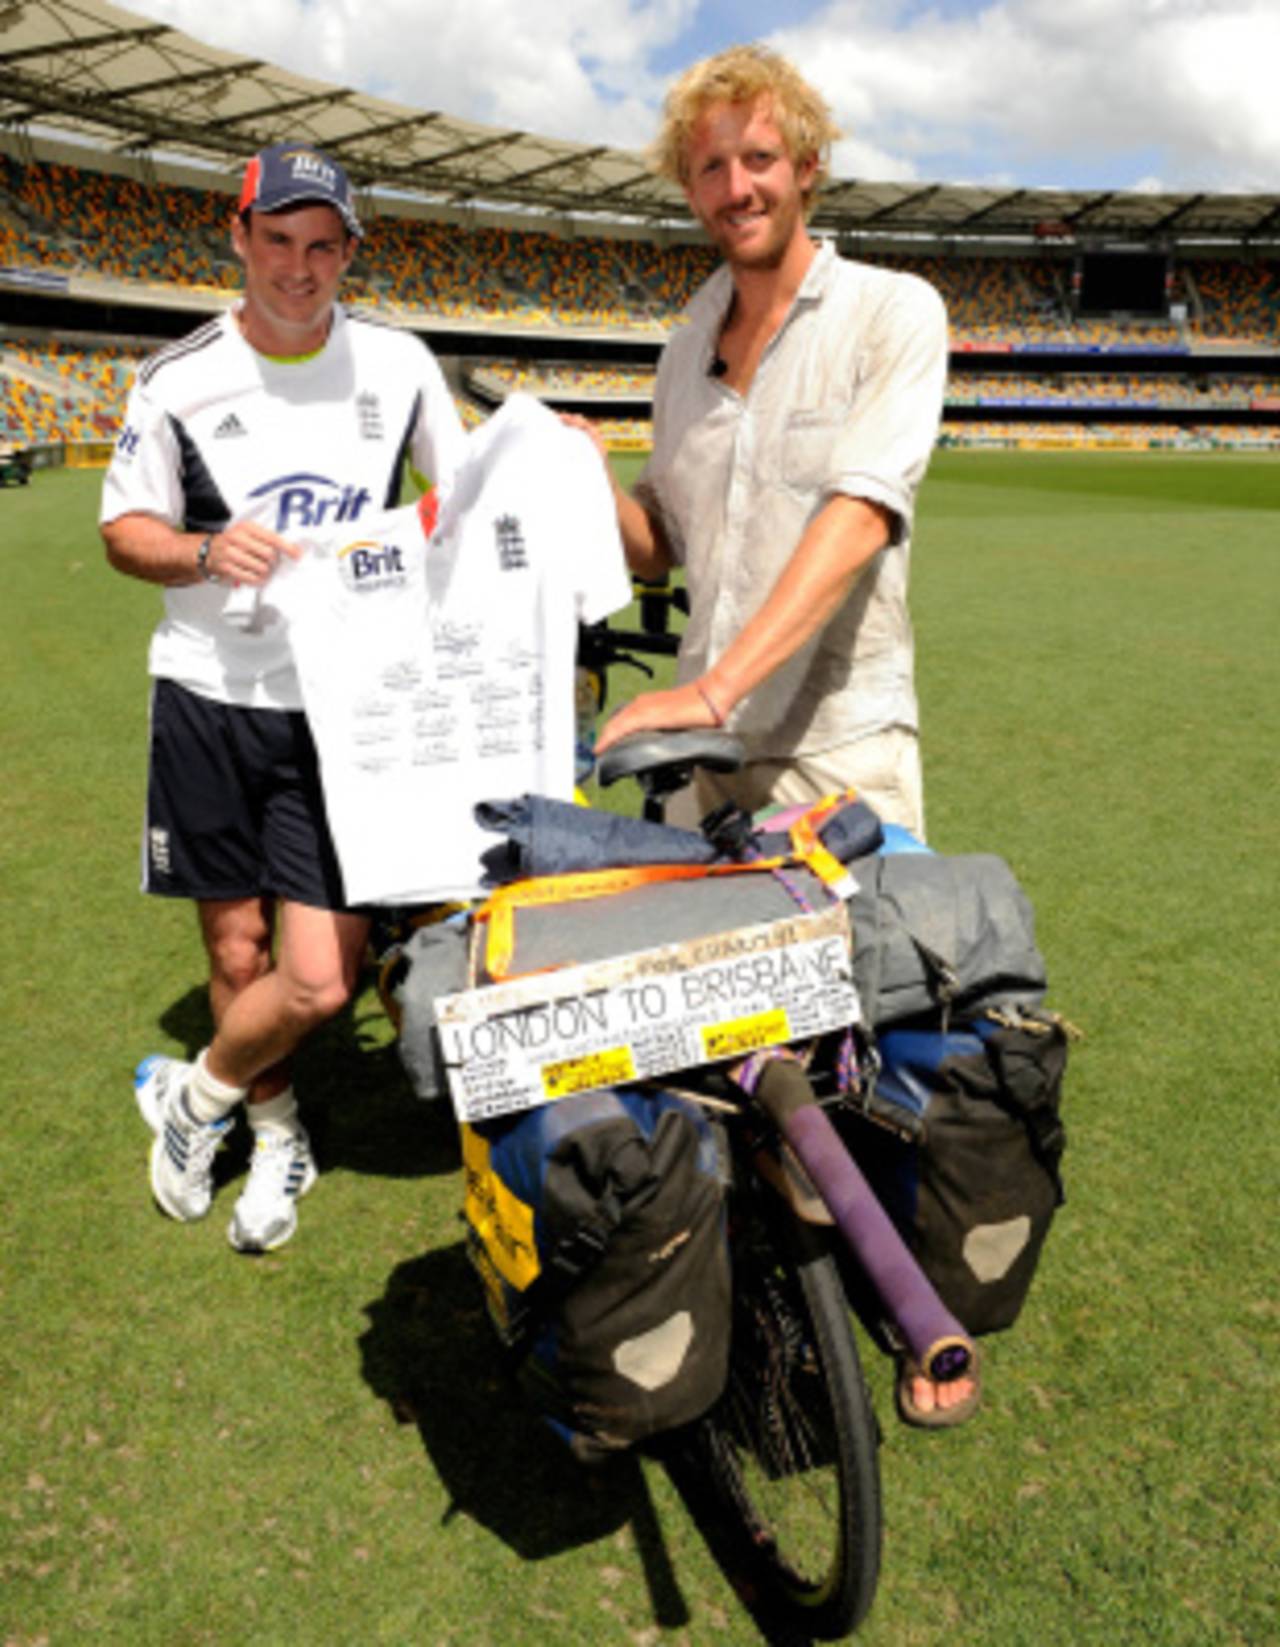 Broom with Andrew Strauss at the end of the his journey, at the Gabba&nbsp;&nbsp;&bull;&nbsp;&nbsp;Oli Broom